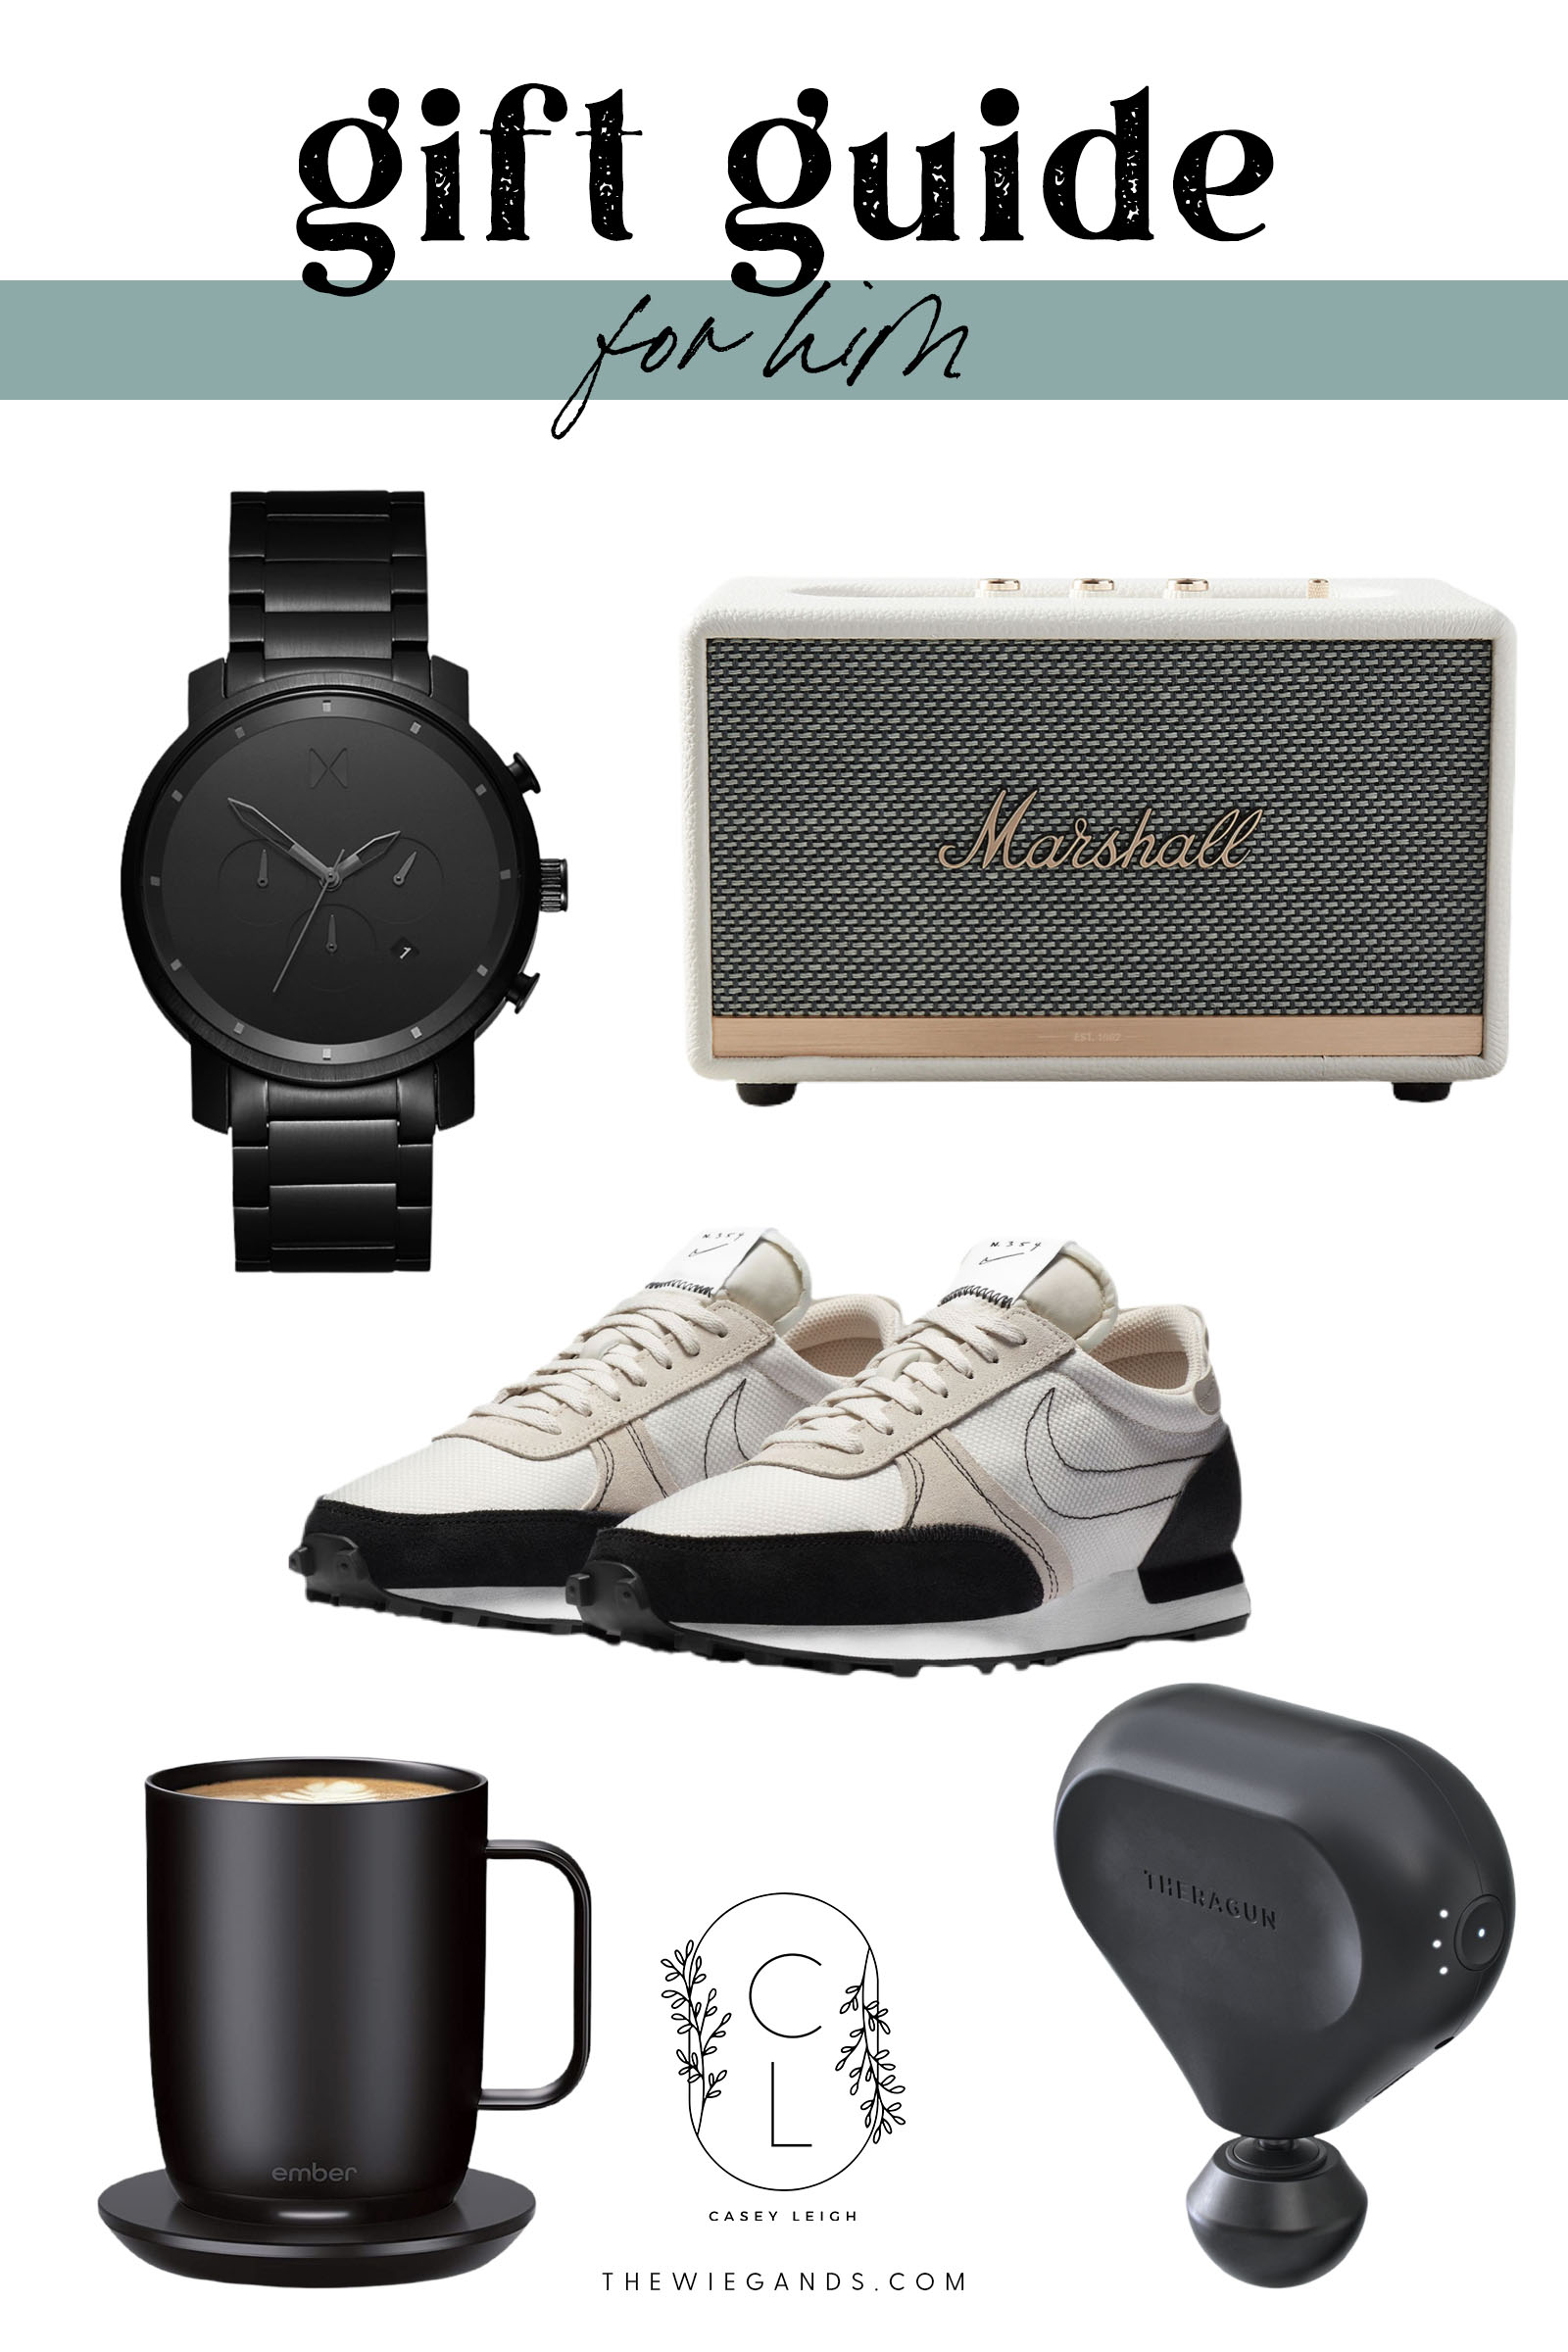 holiday gift guide for him